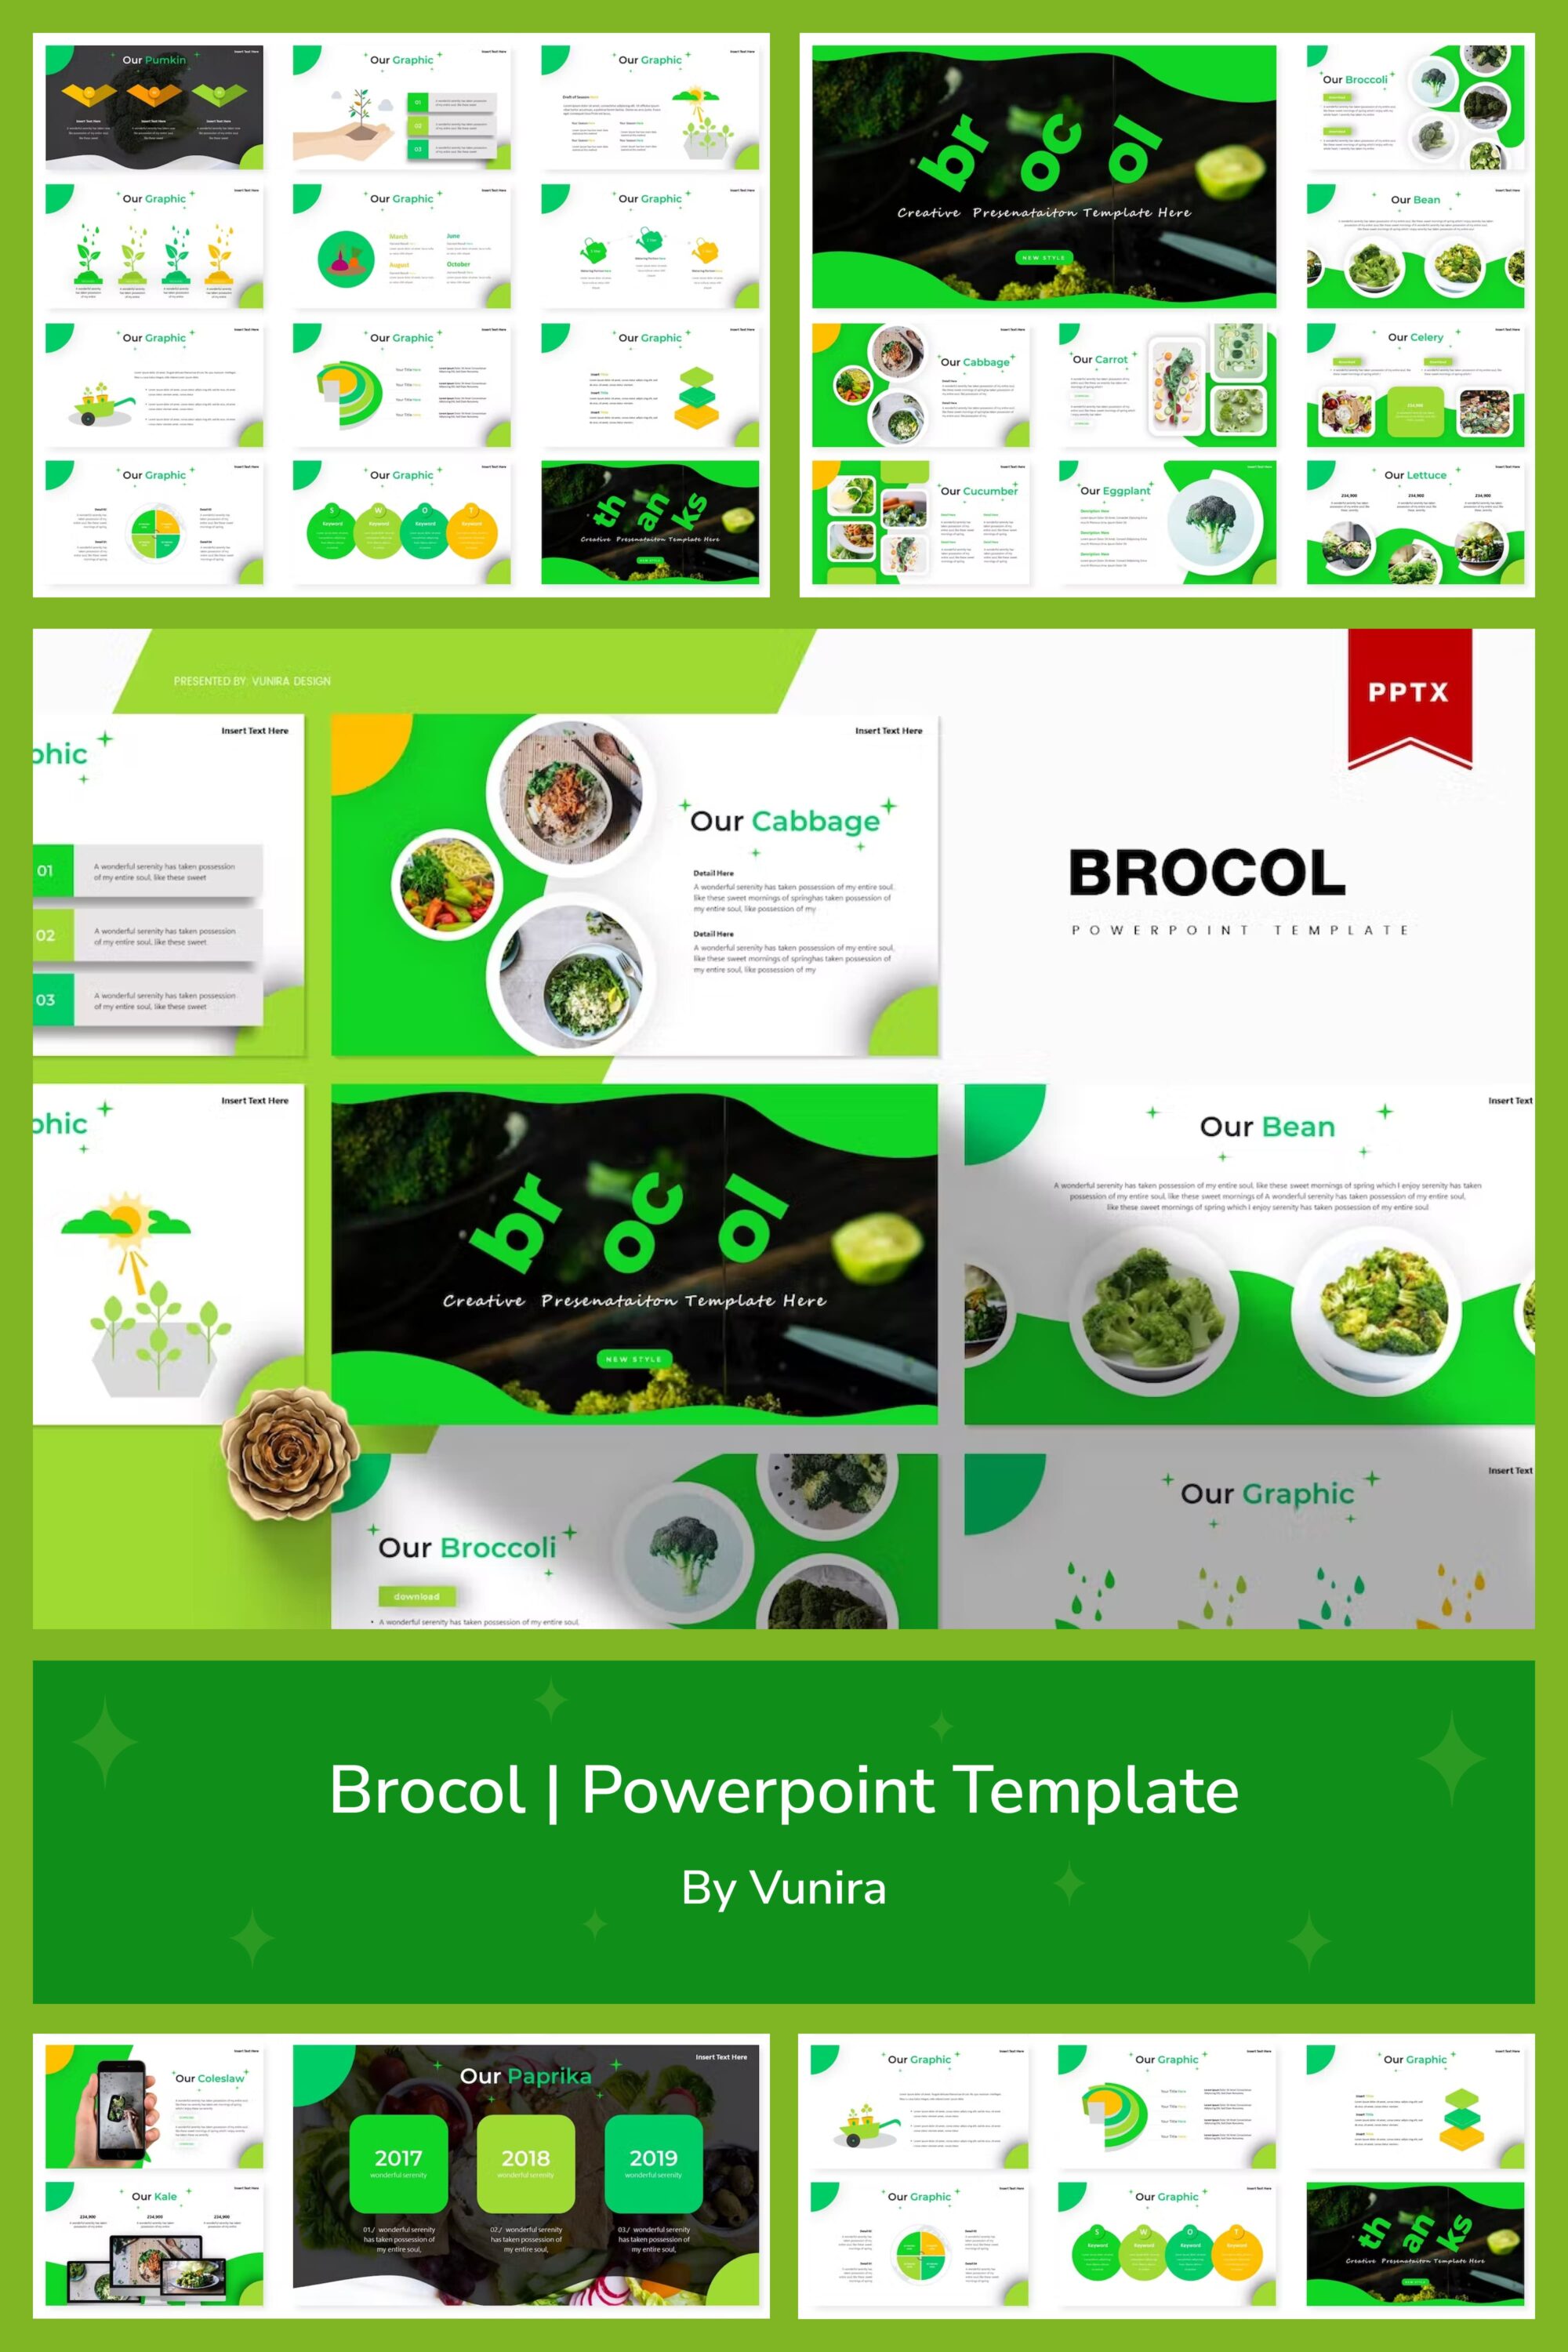 Brocol | Powerpoint Template- pinterest image preview.